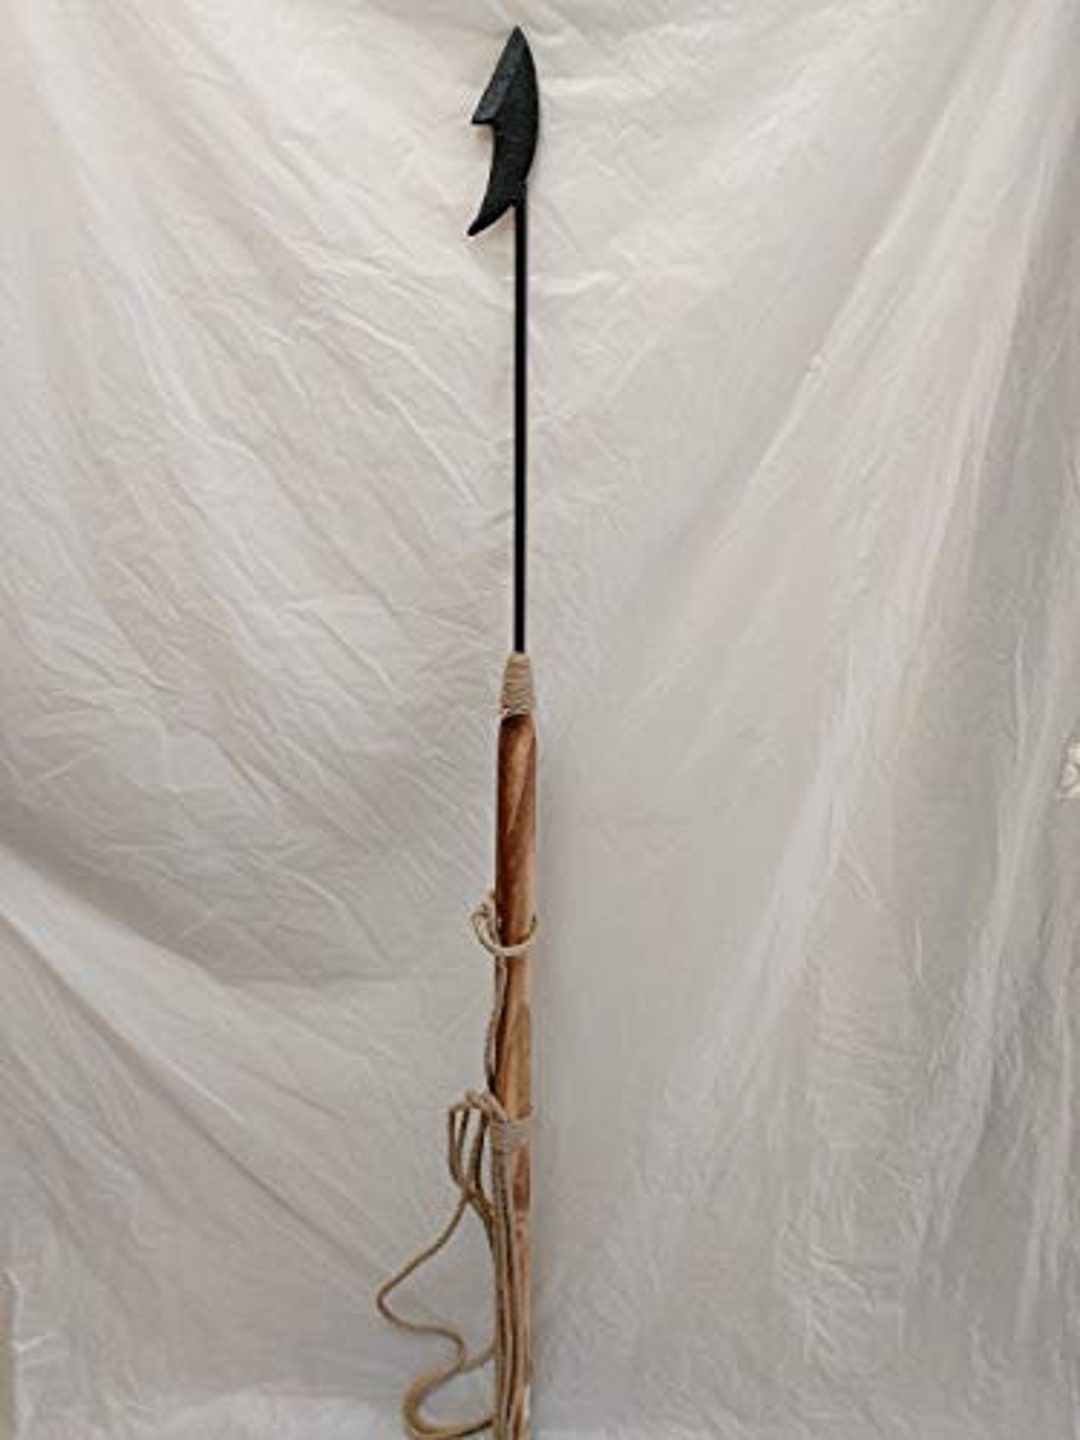 DRH Steel Tipped Harpoon - Distressed Solid Wood Nautical Decor - Fishing Spear with Metal Rod - Perfect Decorative Fishing Harpoon Spear Gift for